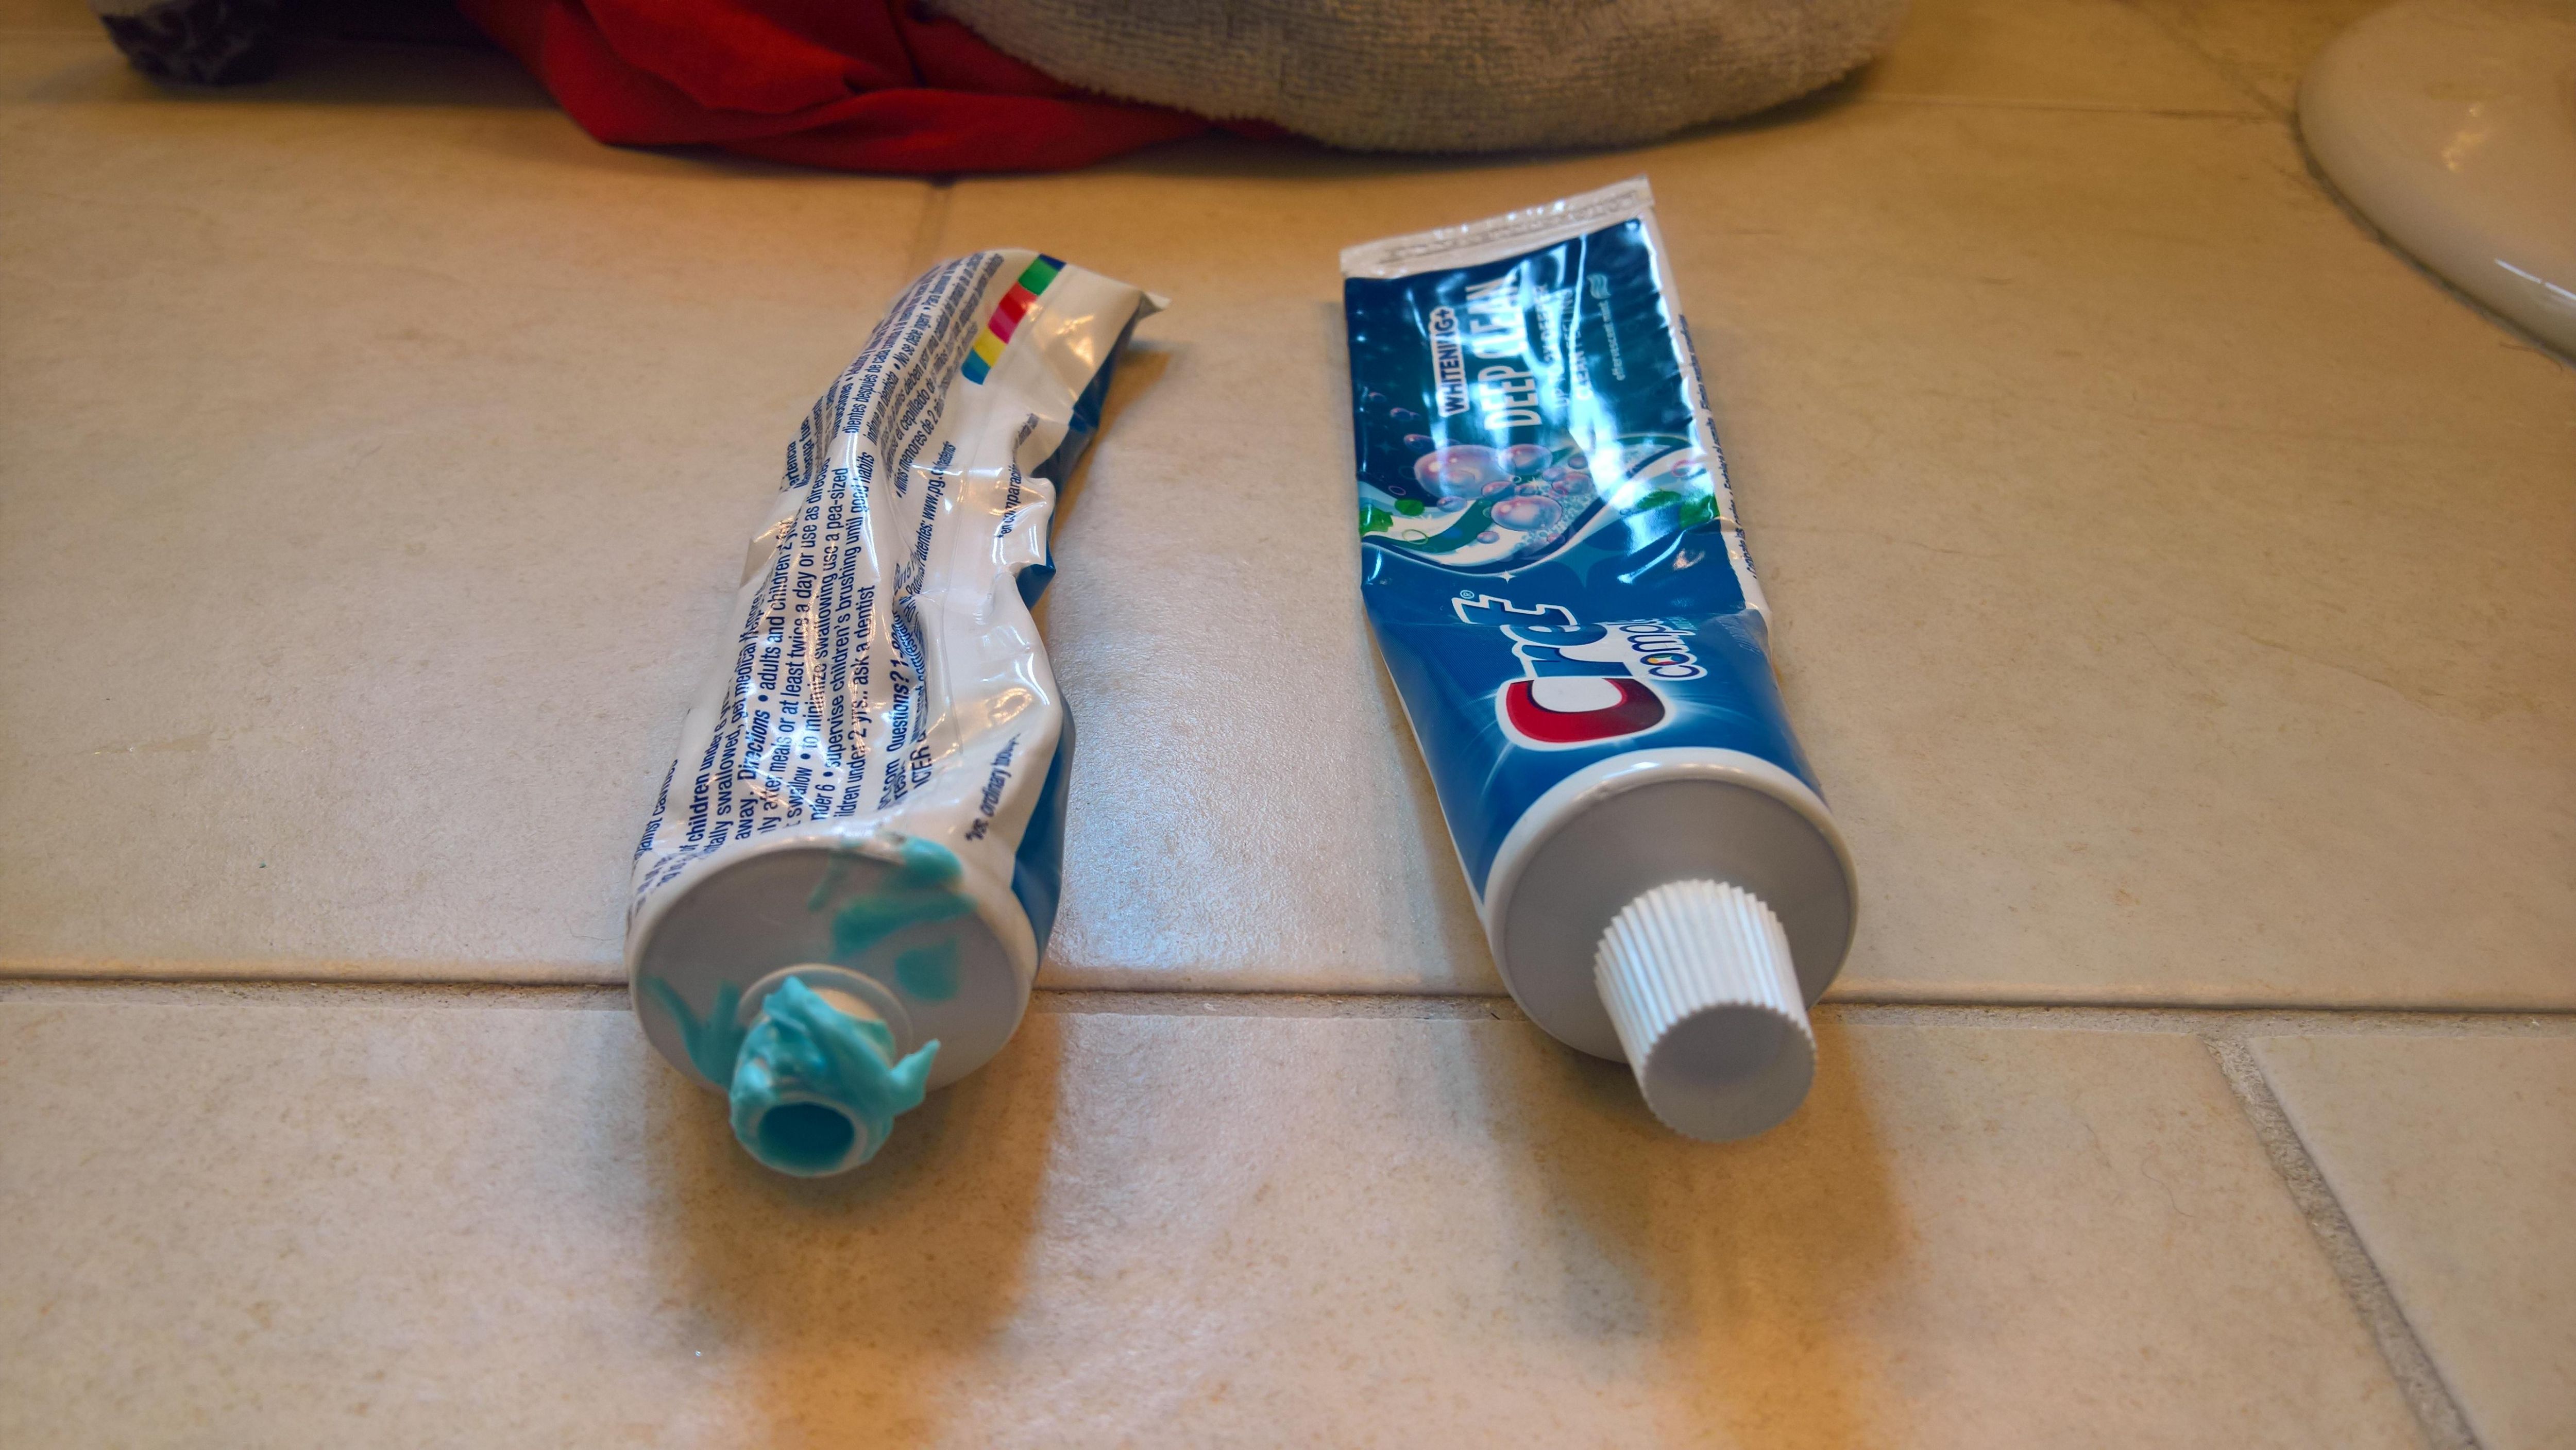 This is why my girlfriend and I use separate toothpaste tubes